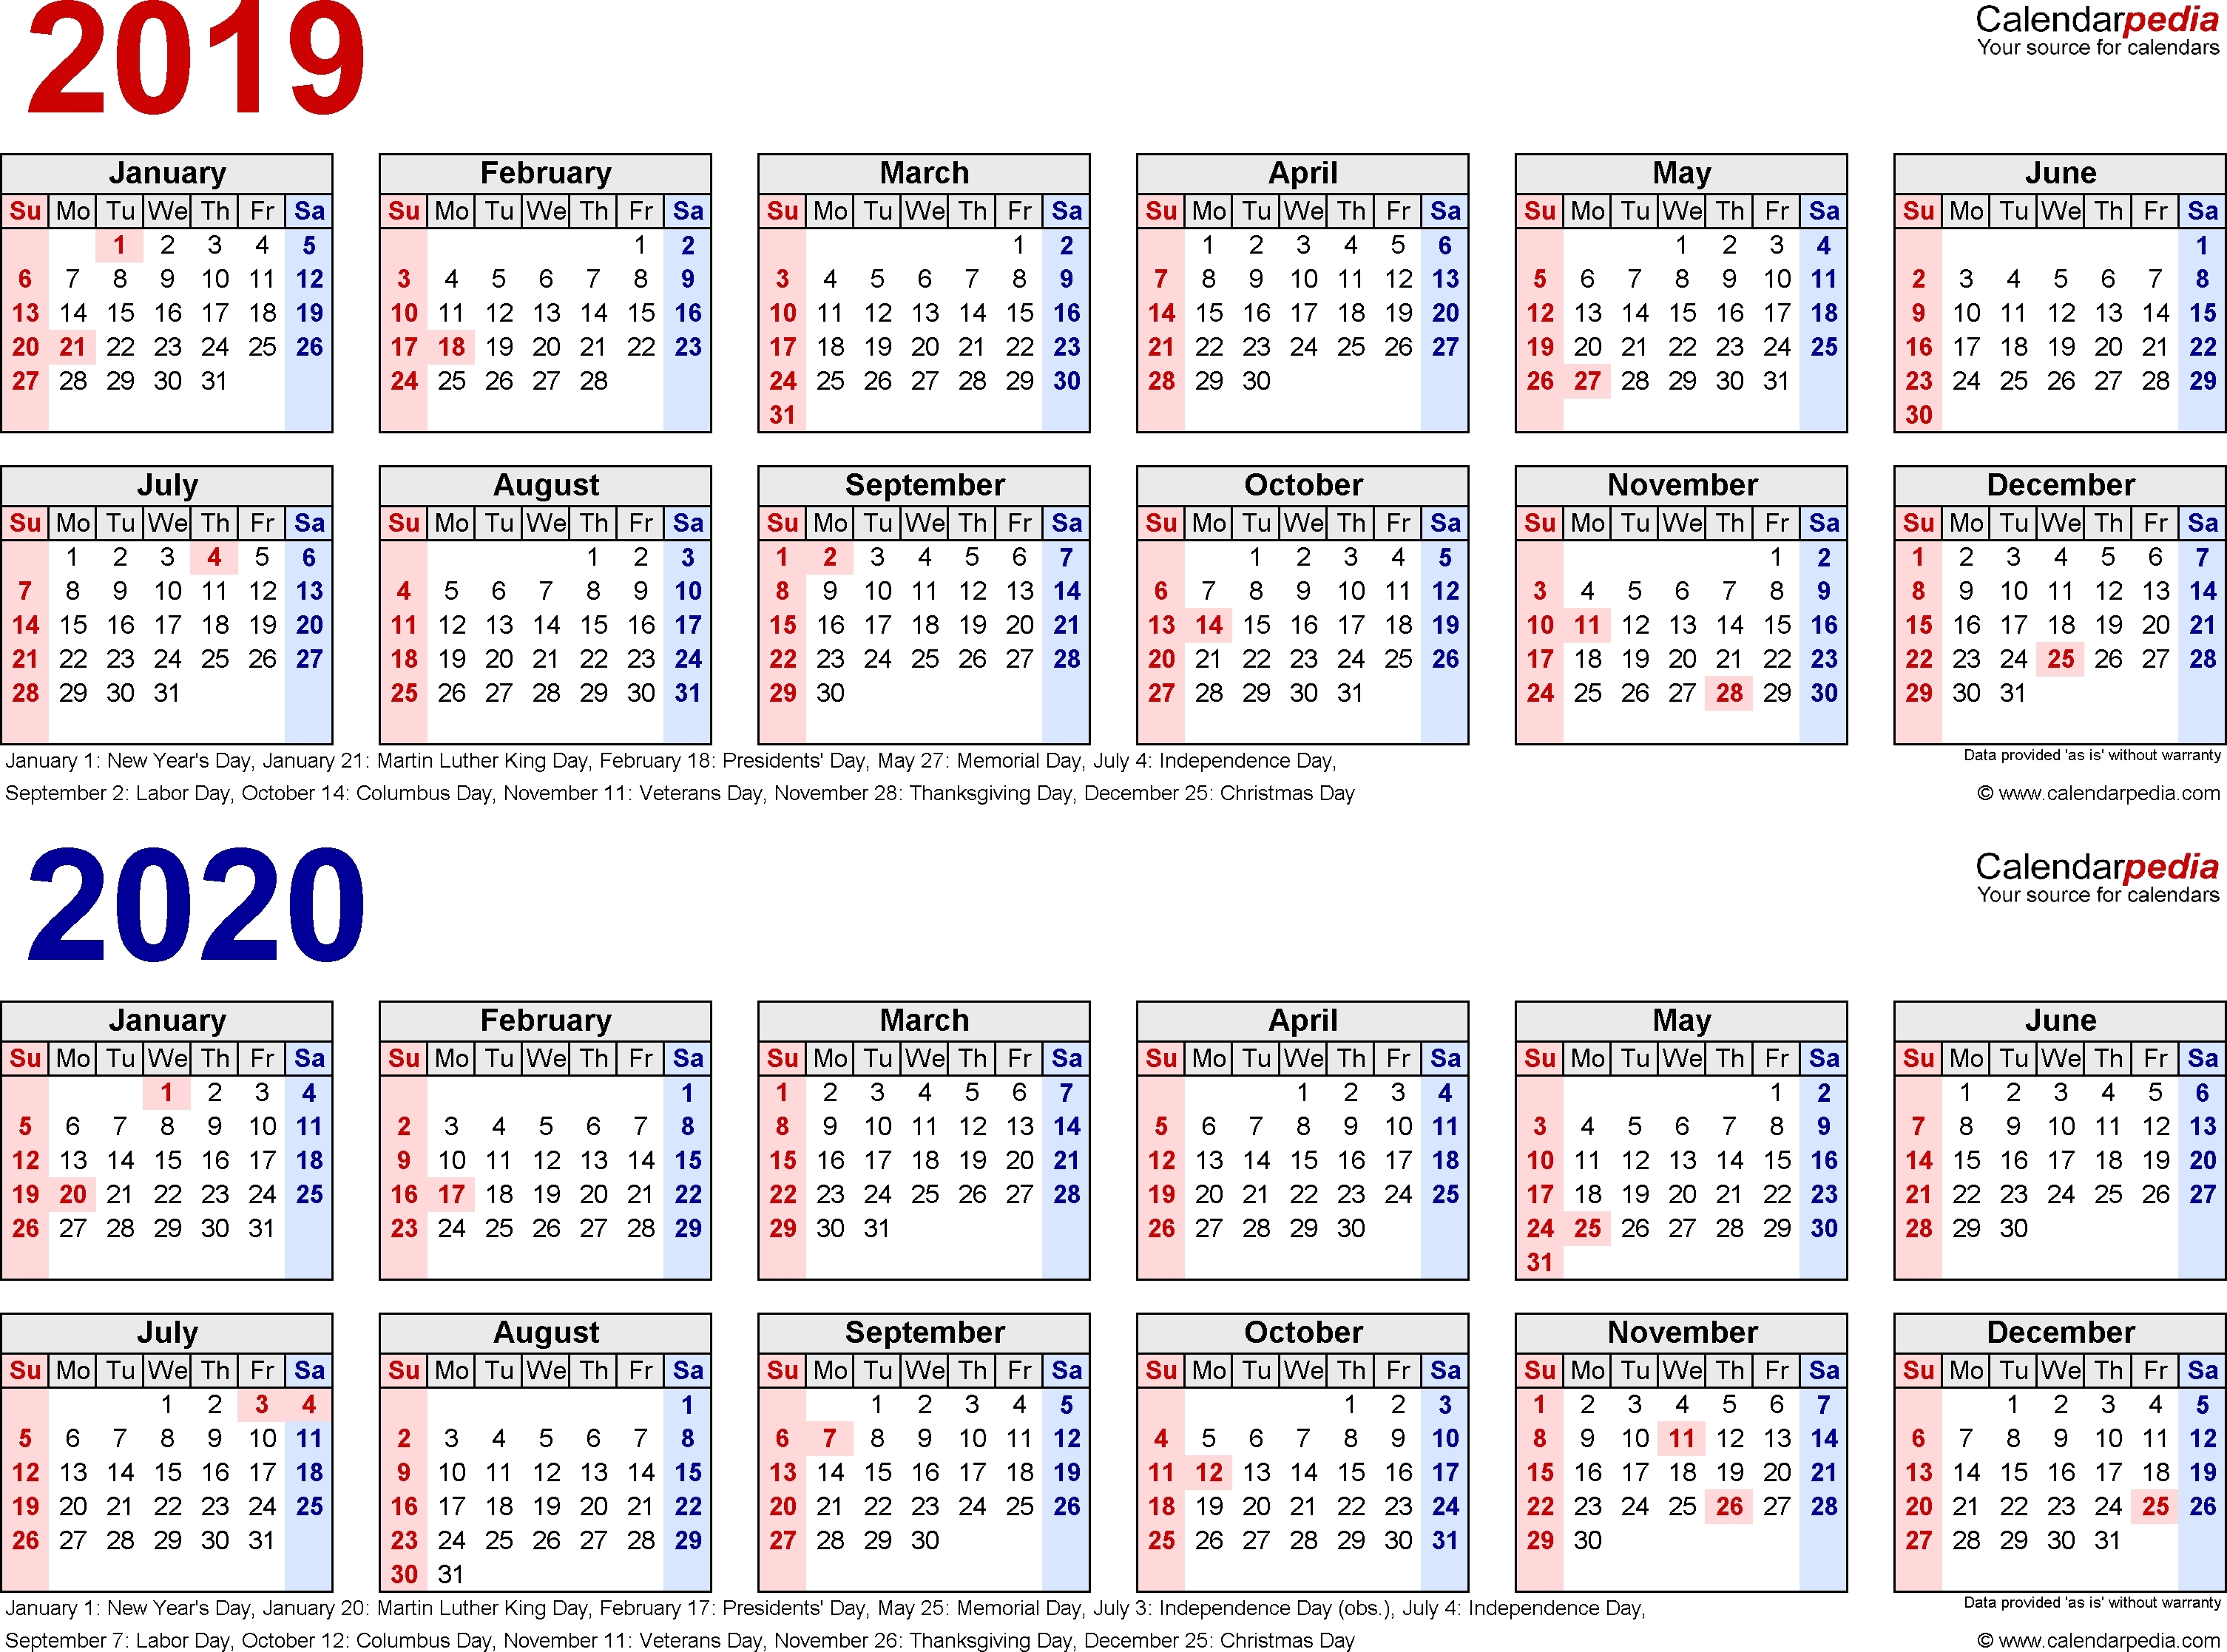 Exceptional 2020 Calendar Showing Holidays • Printable Blank-Calendar Indicating The Holidays